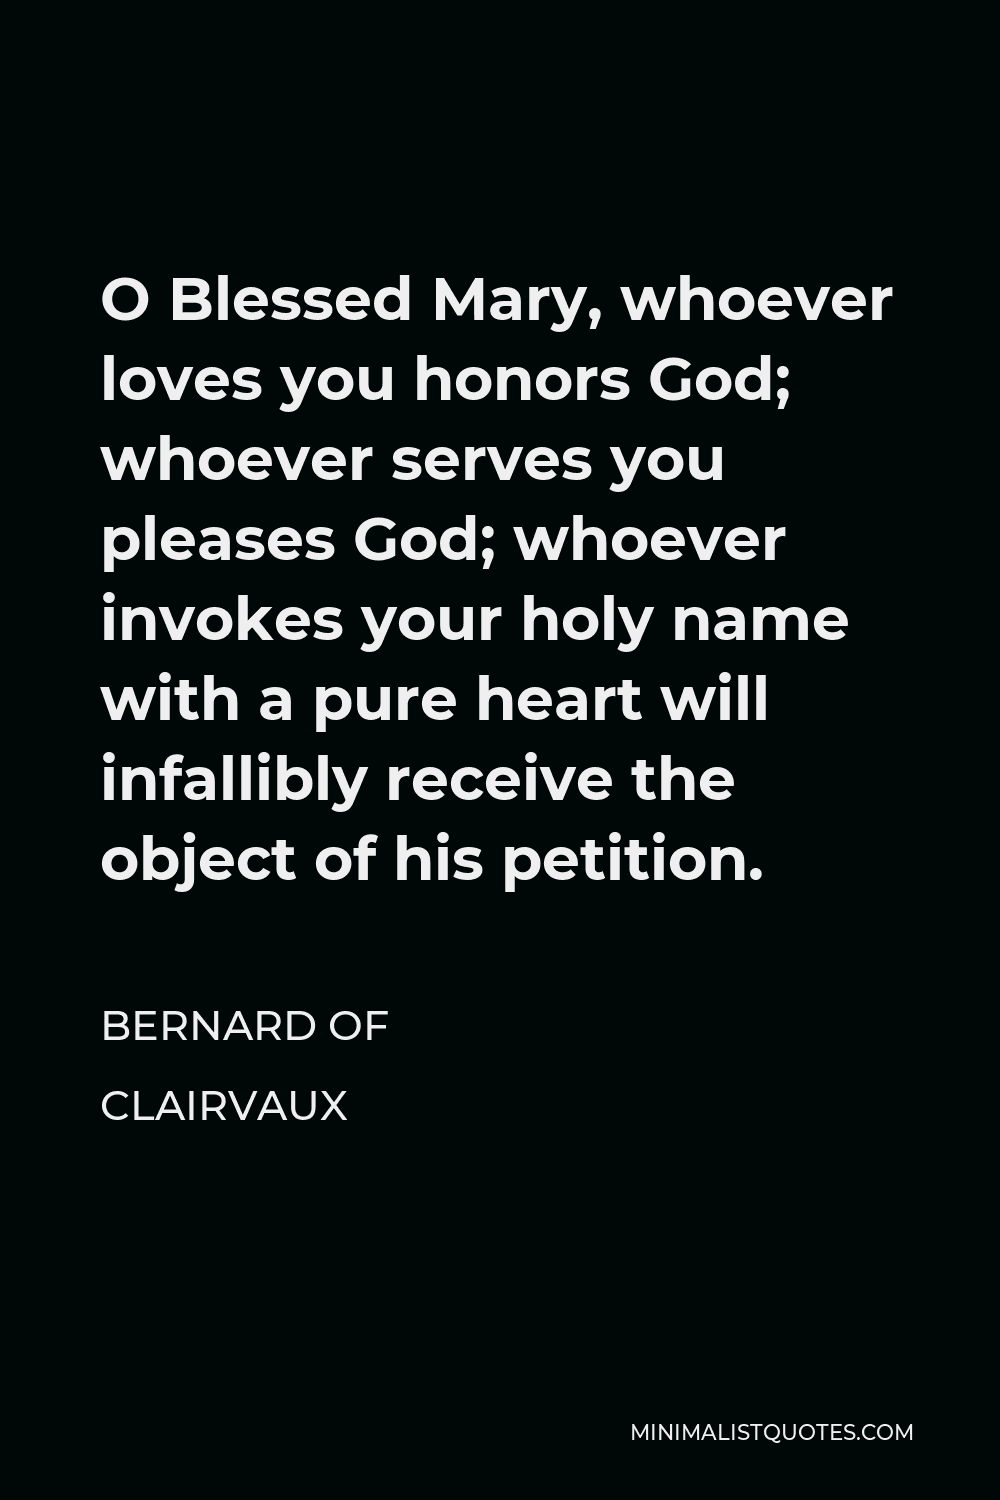 Bernard of Clairvaux Quote - O Blessed Mary, whoever loves you honors God; whoever serves you pleases God; whoever invokes your holy name with a pure heart will infallibly receive the object of his petition.